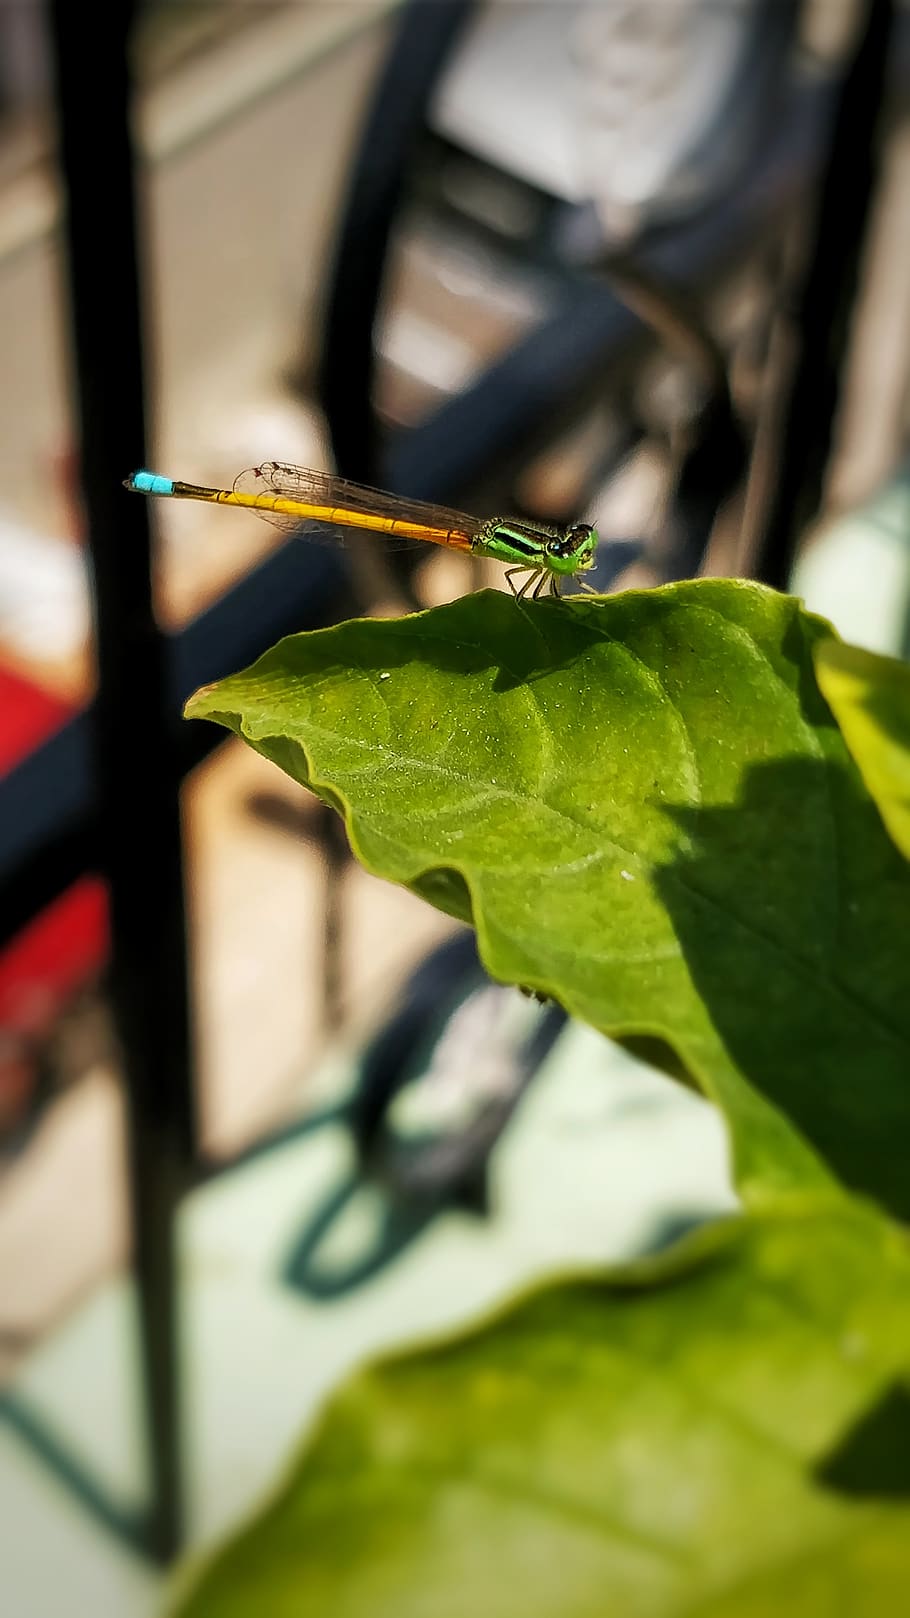 dragon fly, insect, oneplus 5, shotononeplus, smartphone photography, HD wallpaper